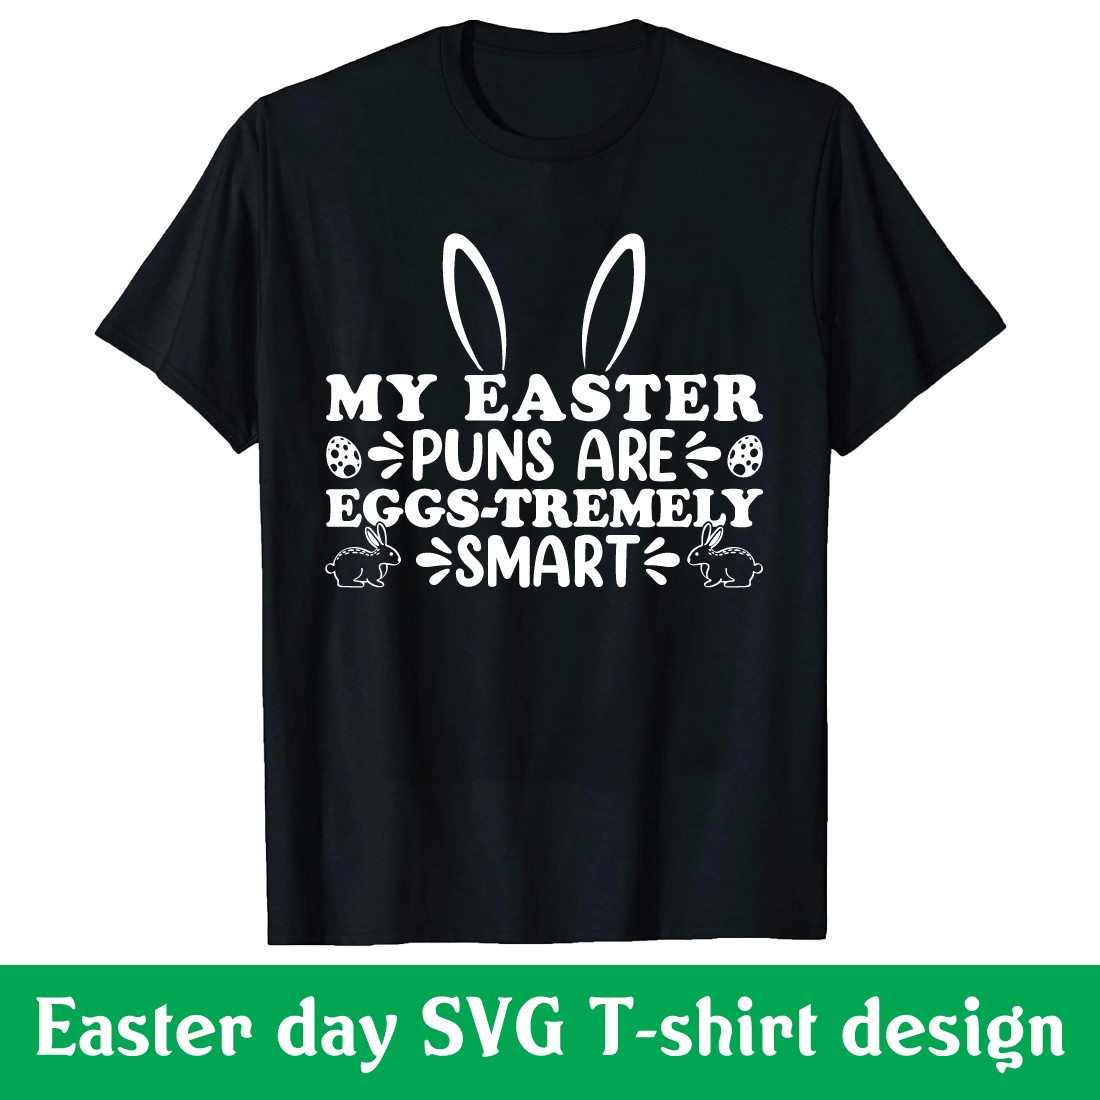 MY Easter puns are eggs tremely smart T-shirt design cover image.